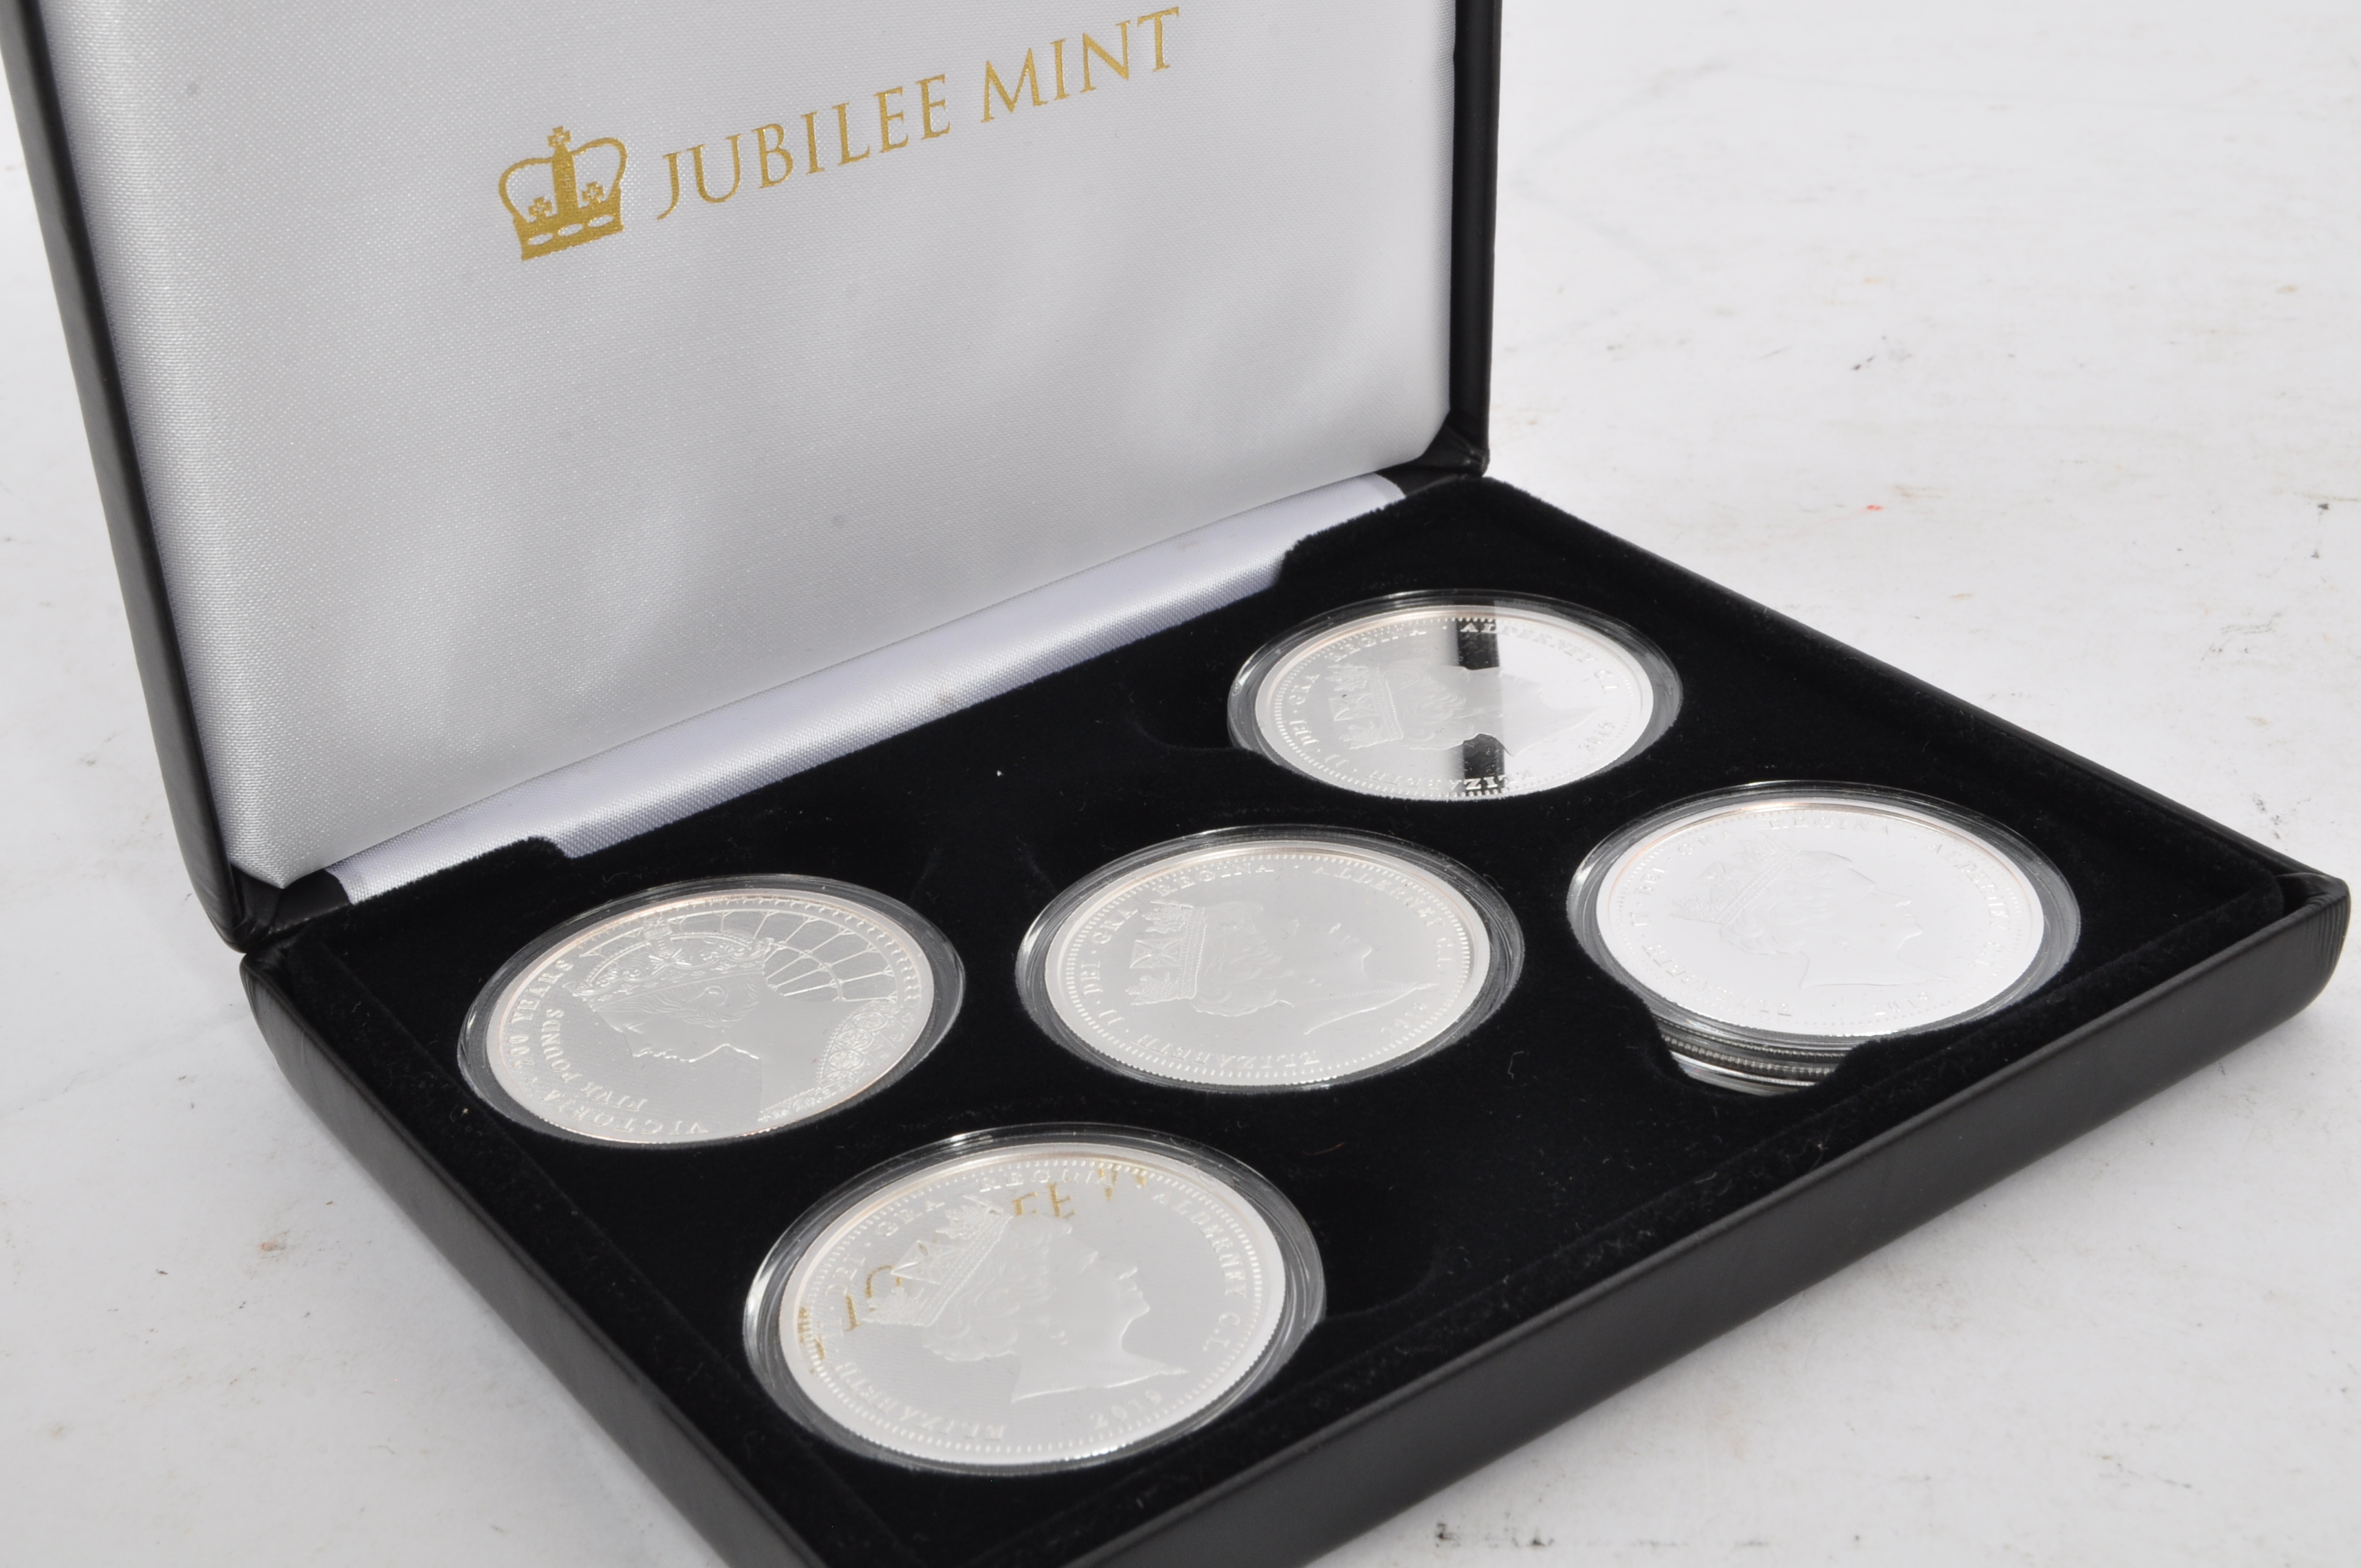 TWO JUBILEE MINT 2019 ANNIVERSARY SILVER PROOF COIN SETS - Image 2 of 7